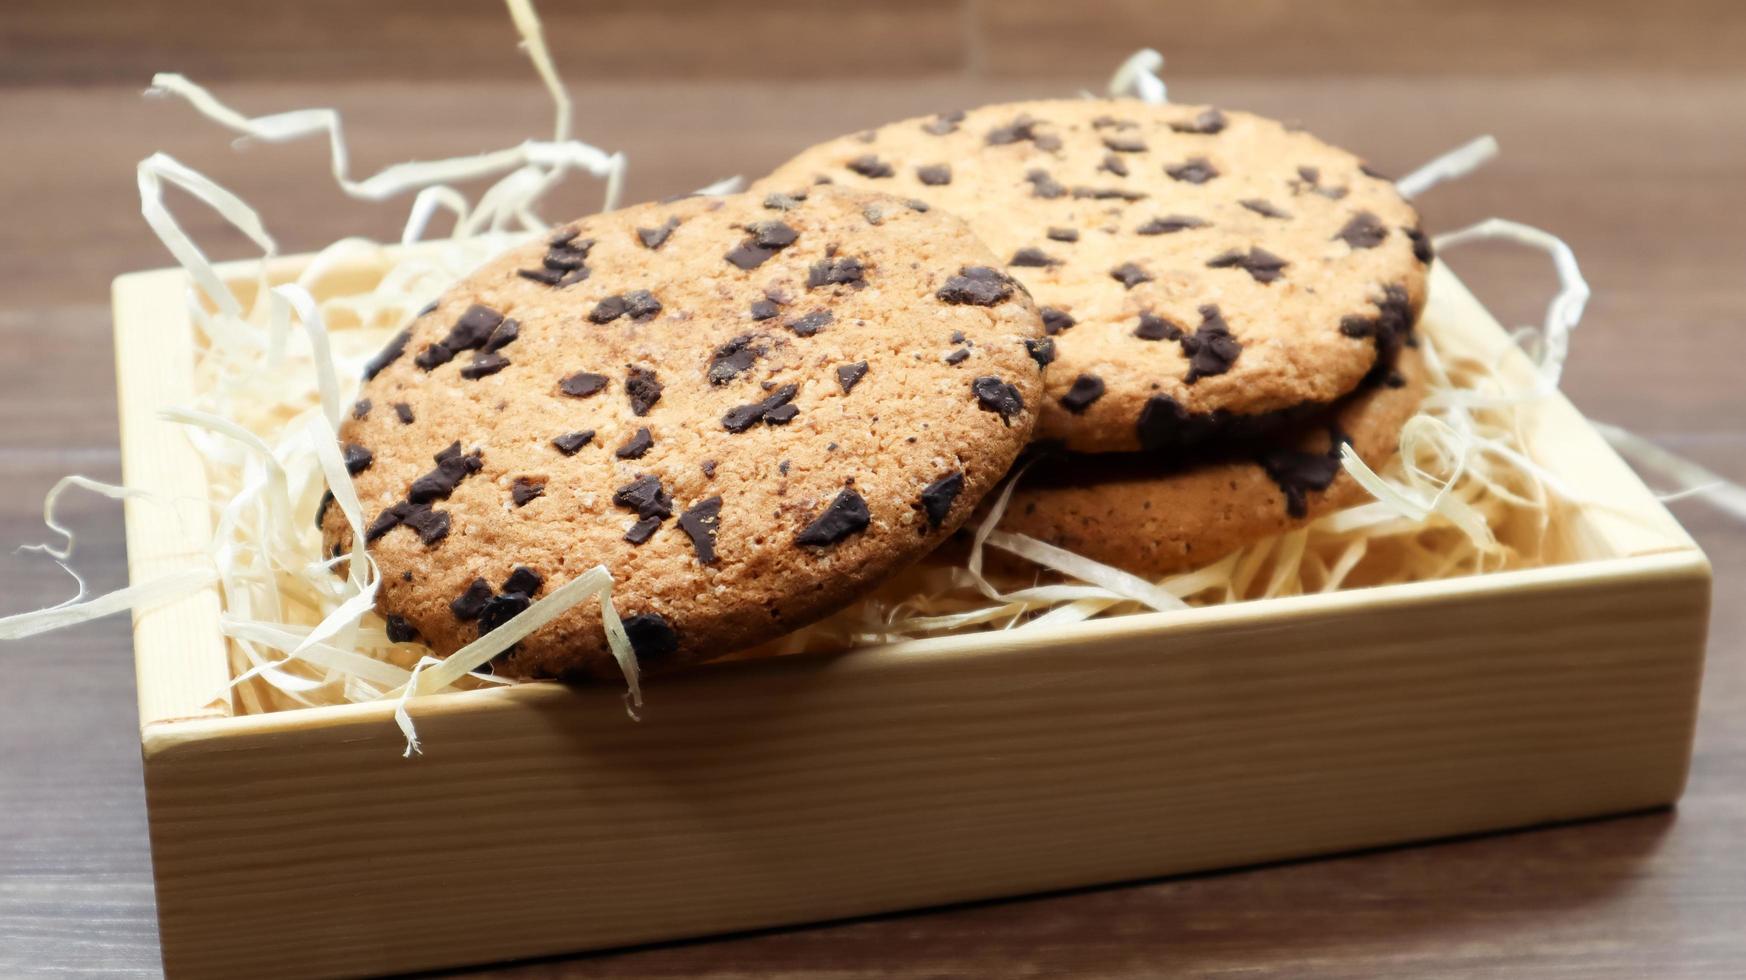 American chocolate chip cookies on a brown wooden table close-up in a box. Traditional rounded crunchy dough with chocolate chips. Bakery. Delicious dessert, pastries. Rural still life. photo